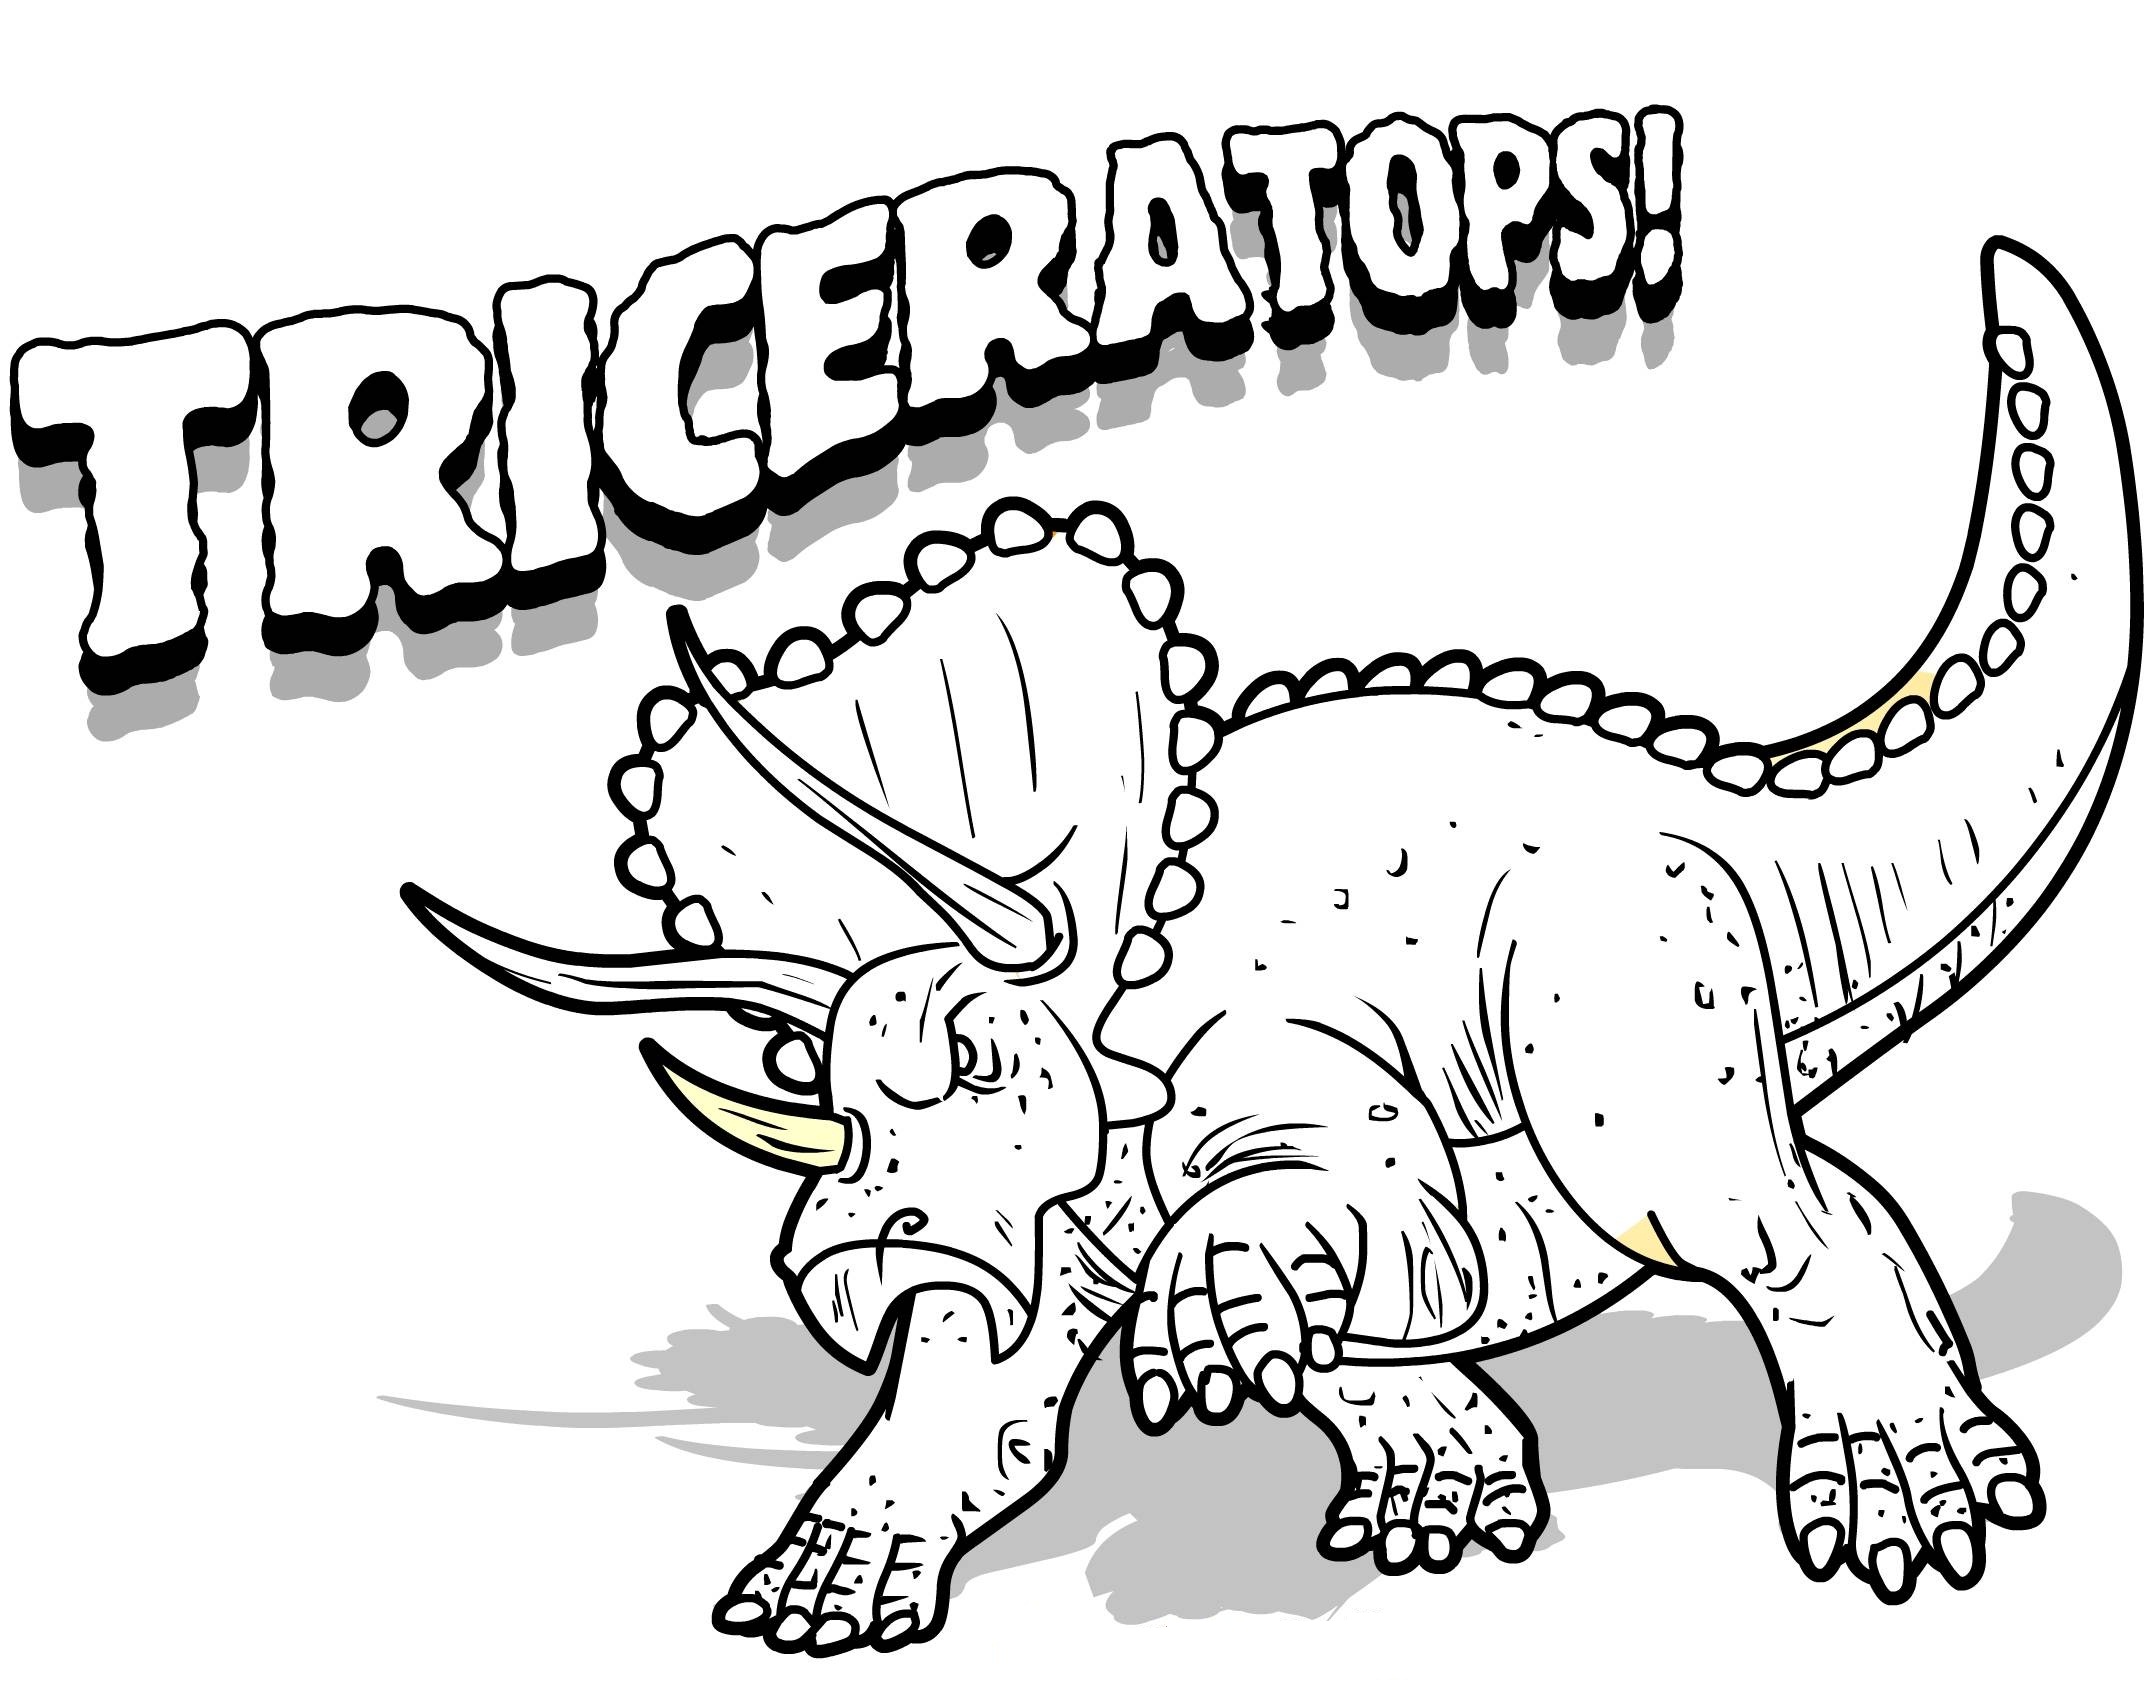 Triceratops Wallpapers